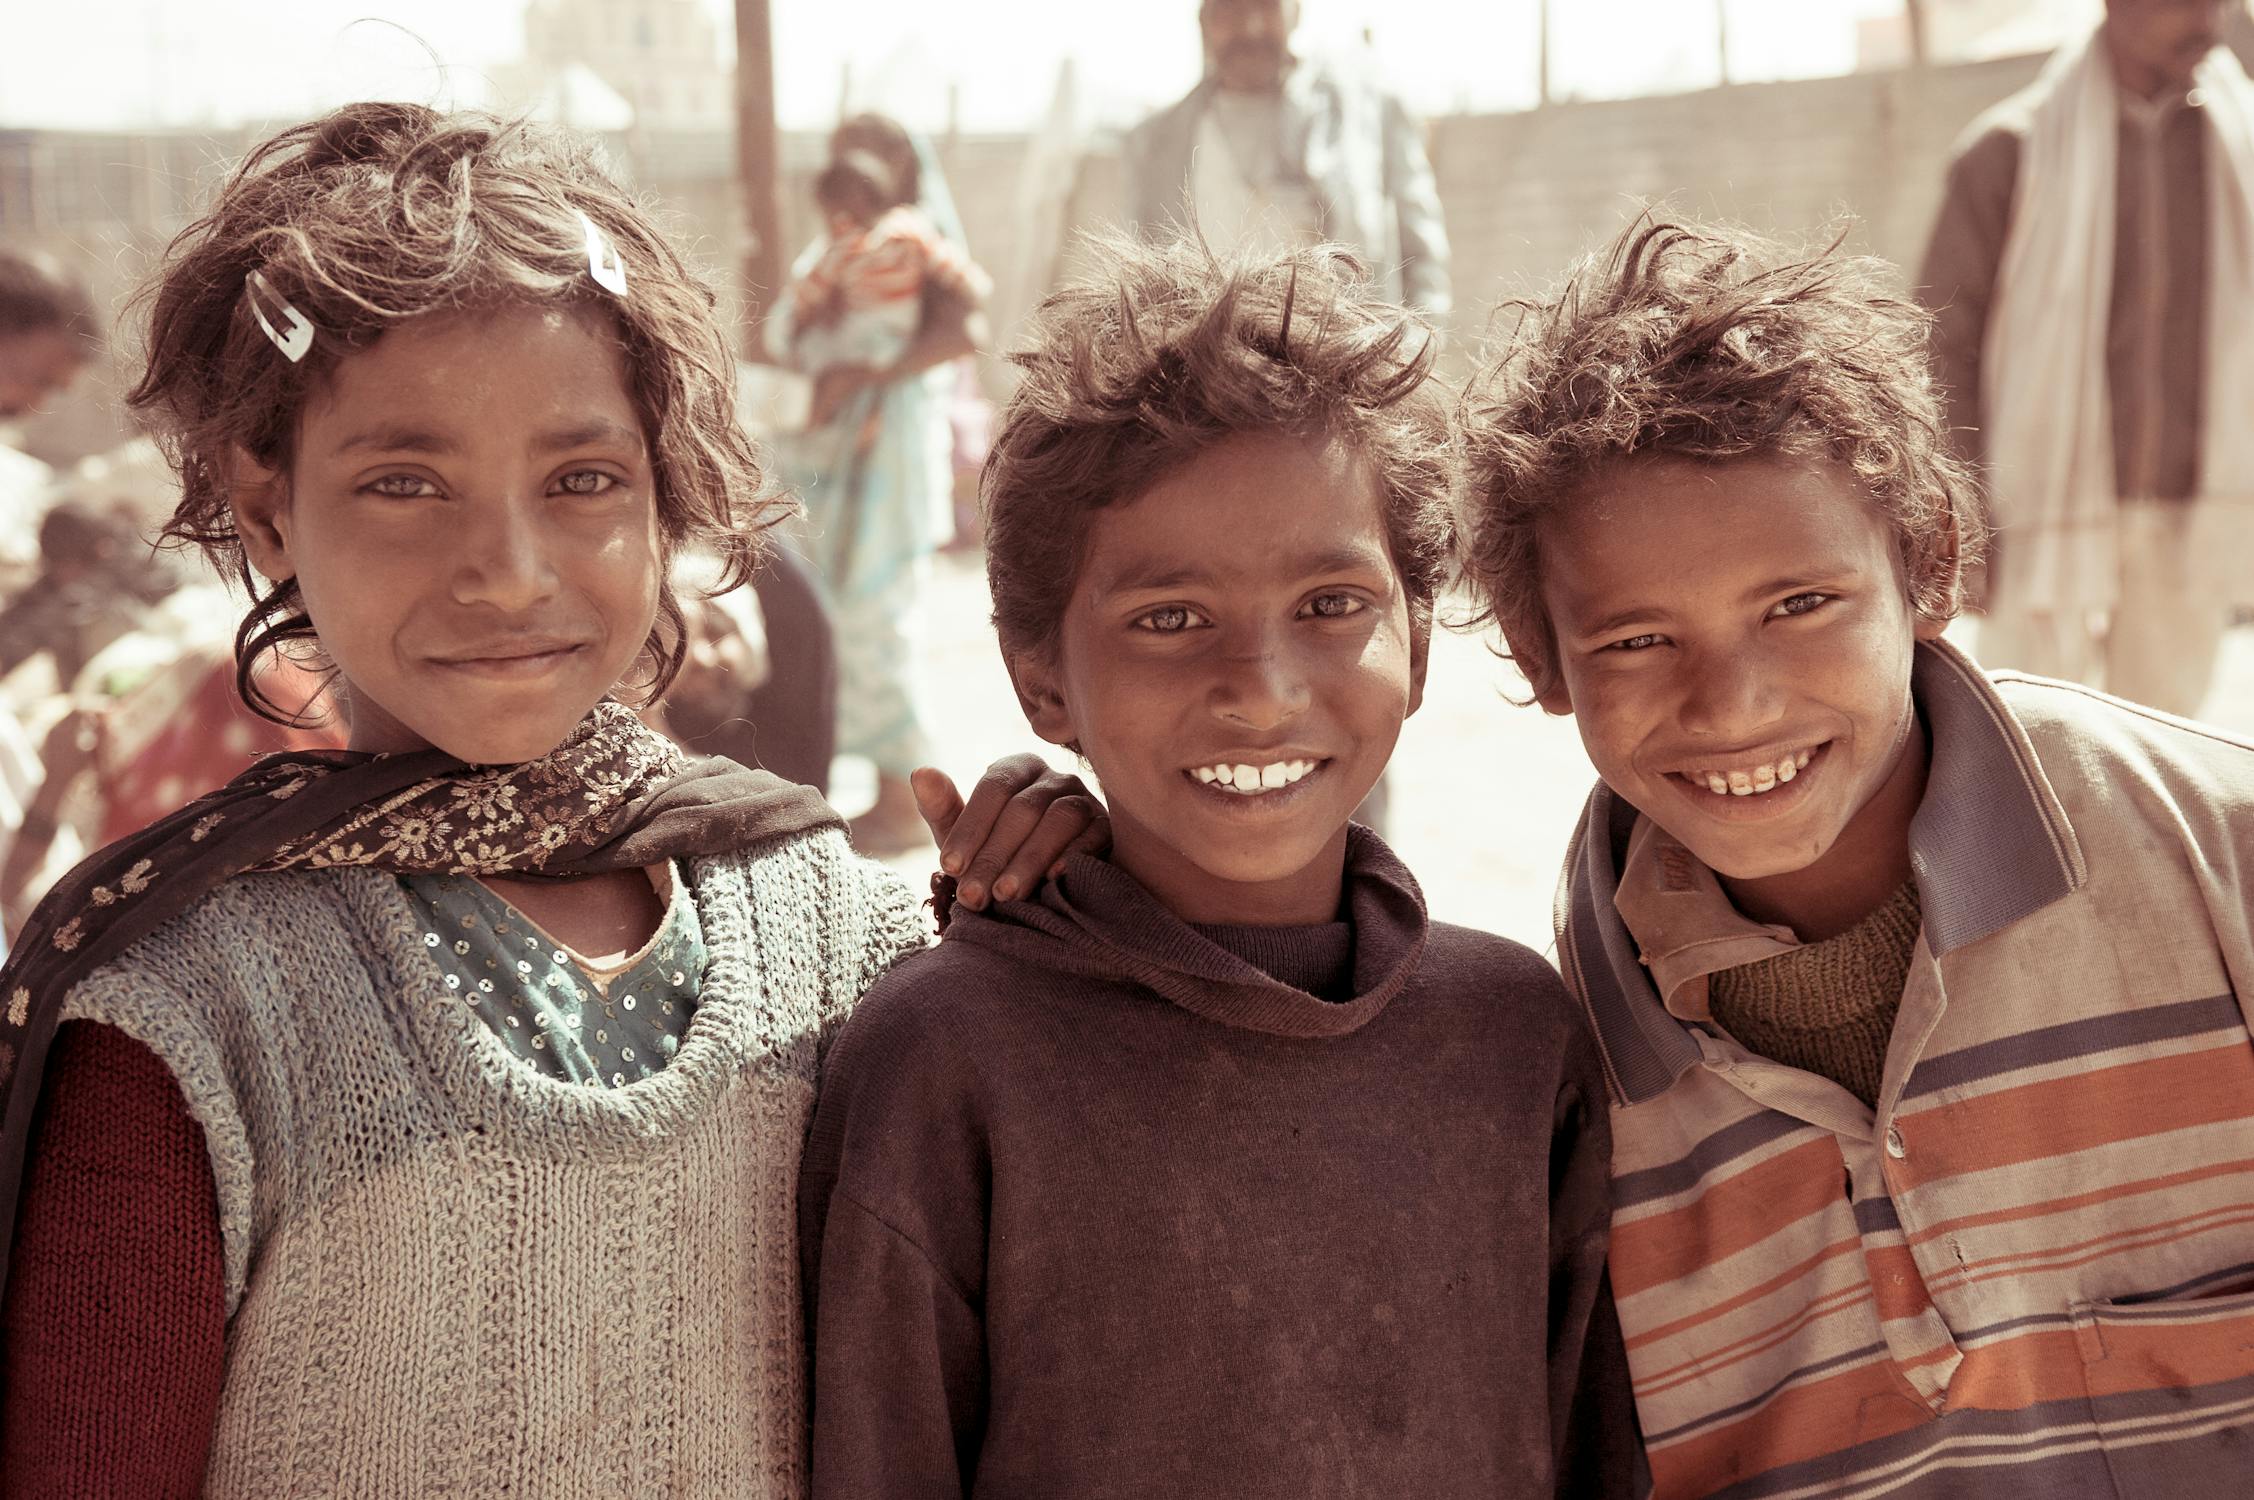 Indian Boys Photo by Arti Agarwal from Pexels: https://www.pexels.com/photo/smiling-children-in-long-sleeves-2218871/